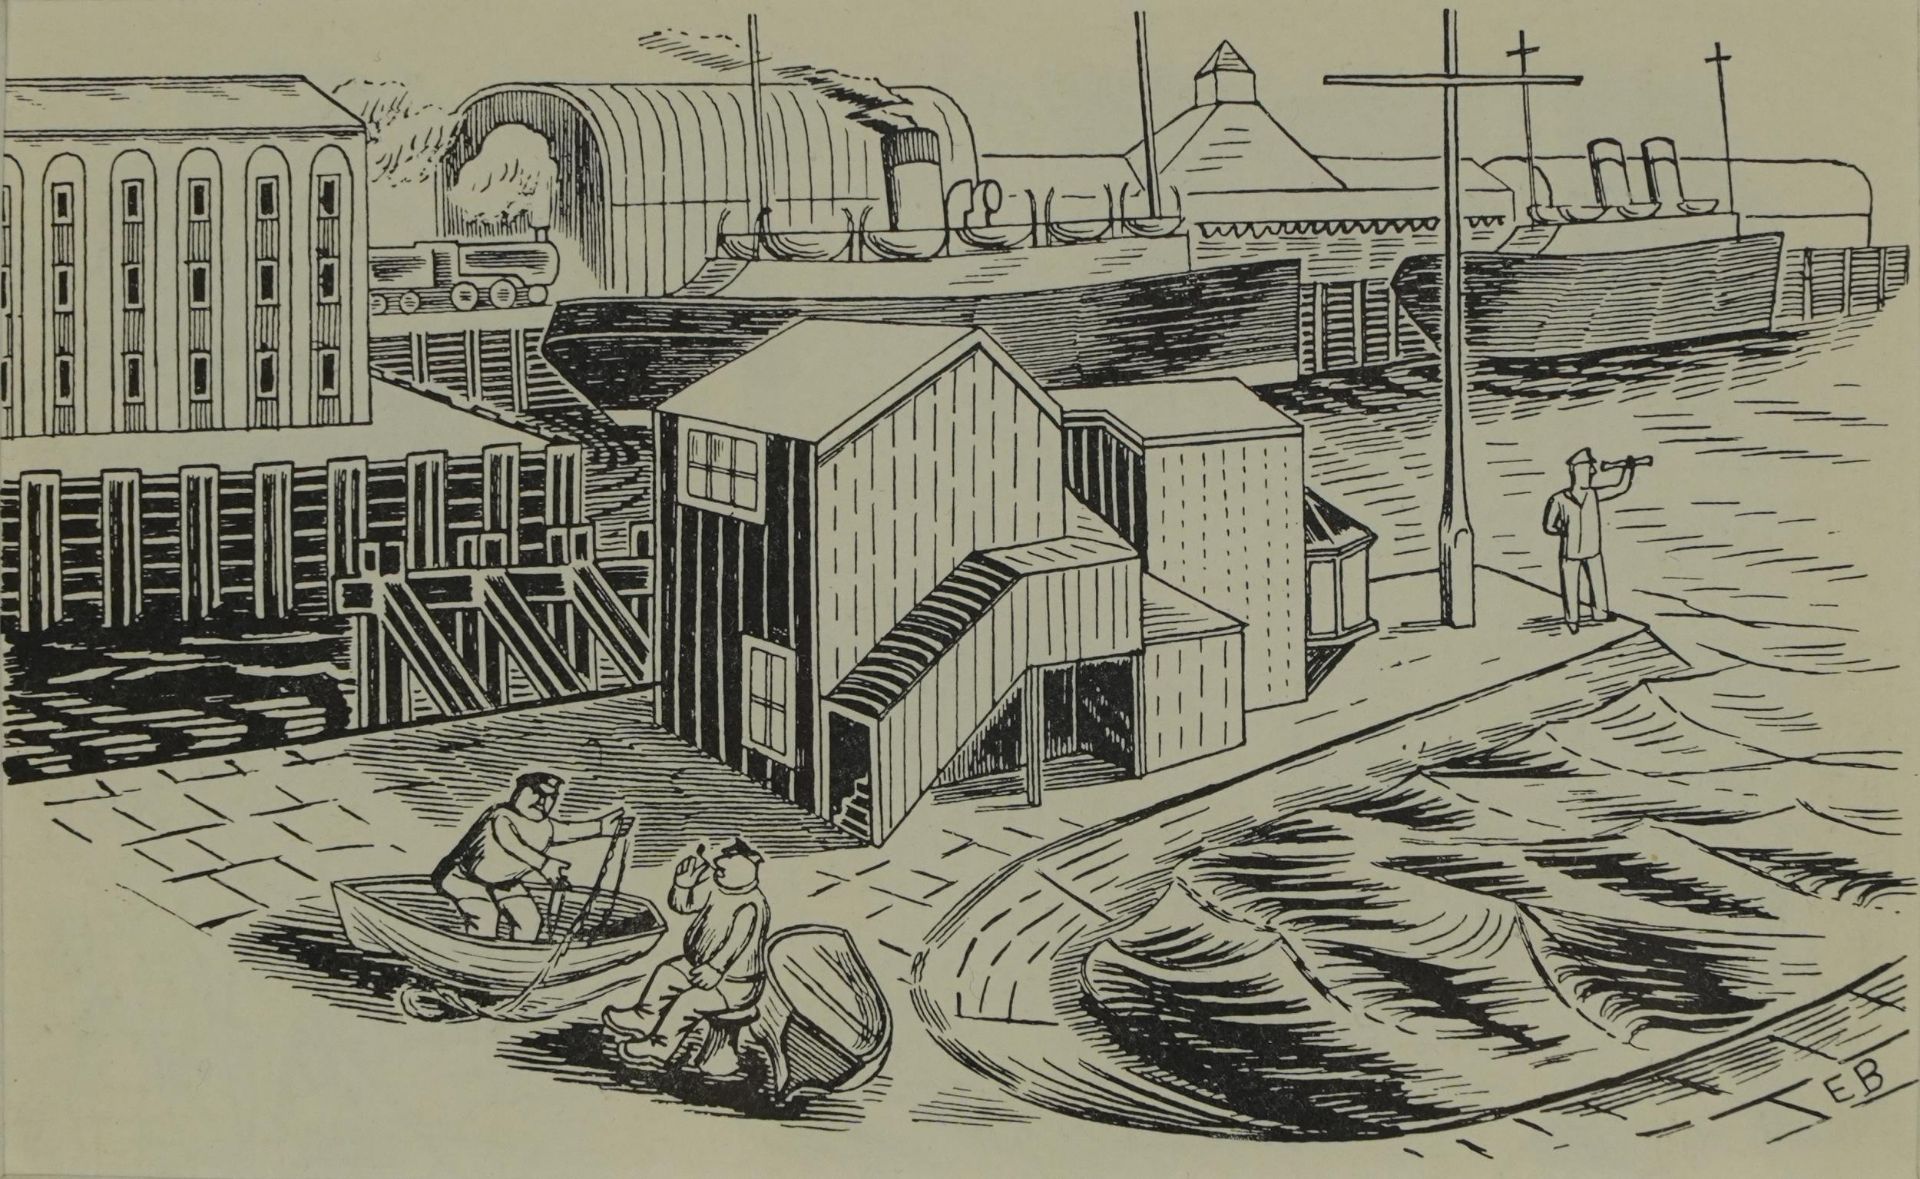 Edward Bawden - Industrial port scene with figures, lithographic print, various inscriptions verso